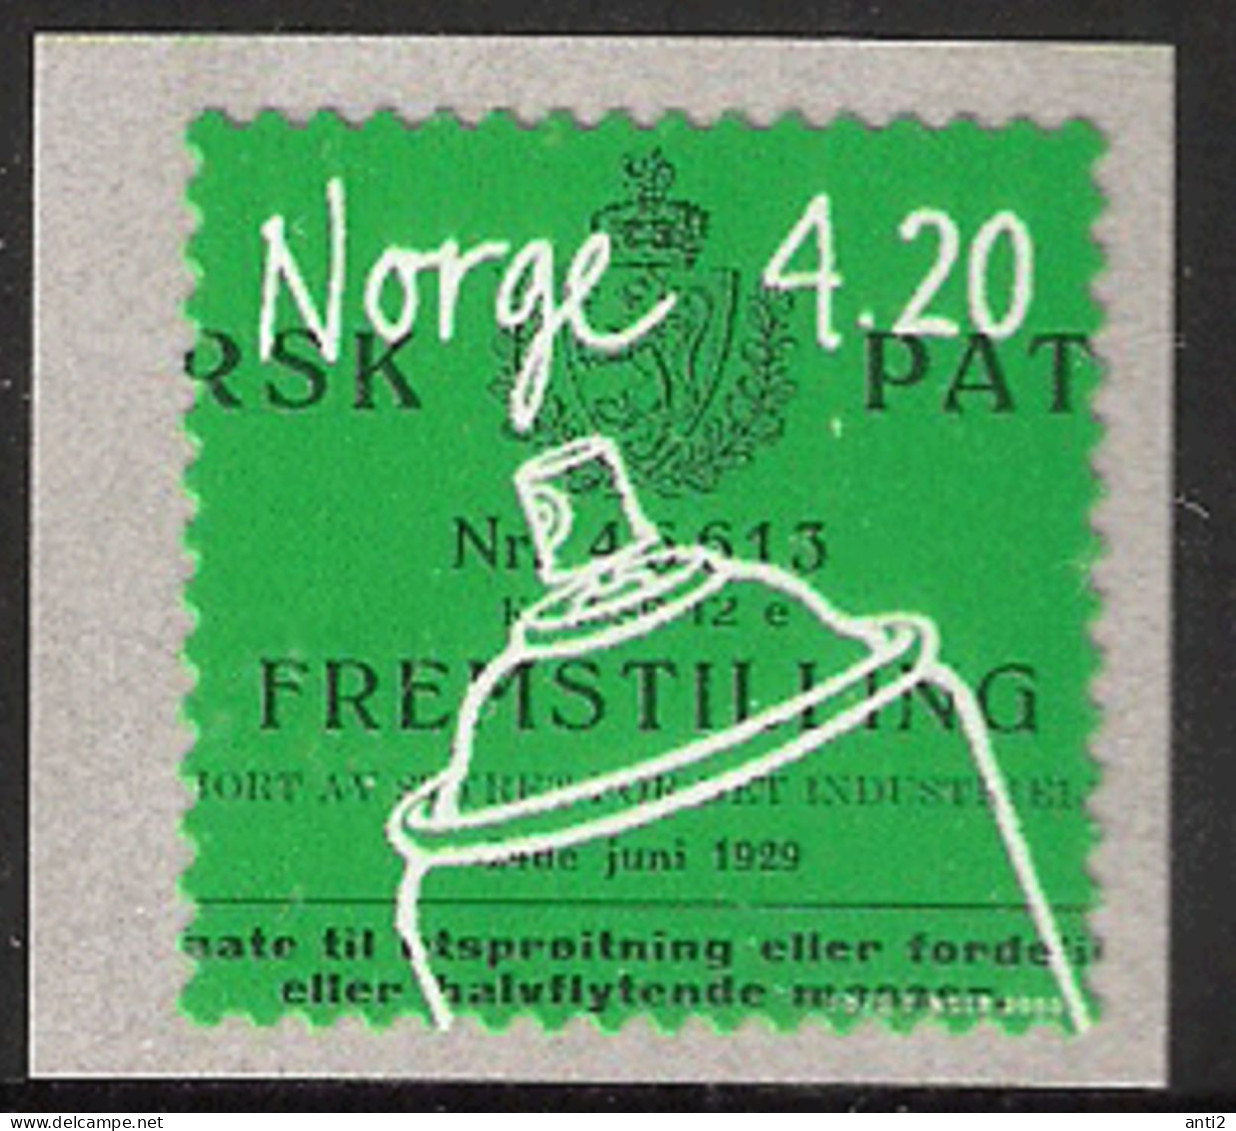 Norway Norge 2000 Norwegian Inventiveness. Aerosol Container. Spray Can Mi 1354  MNH(**) - Unused Stamps